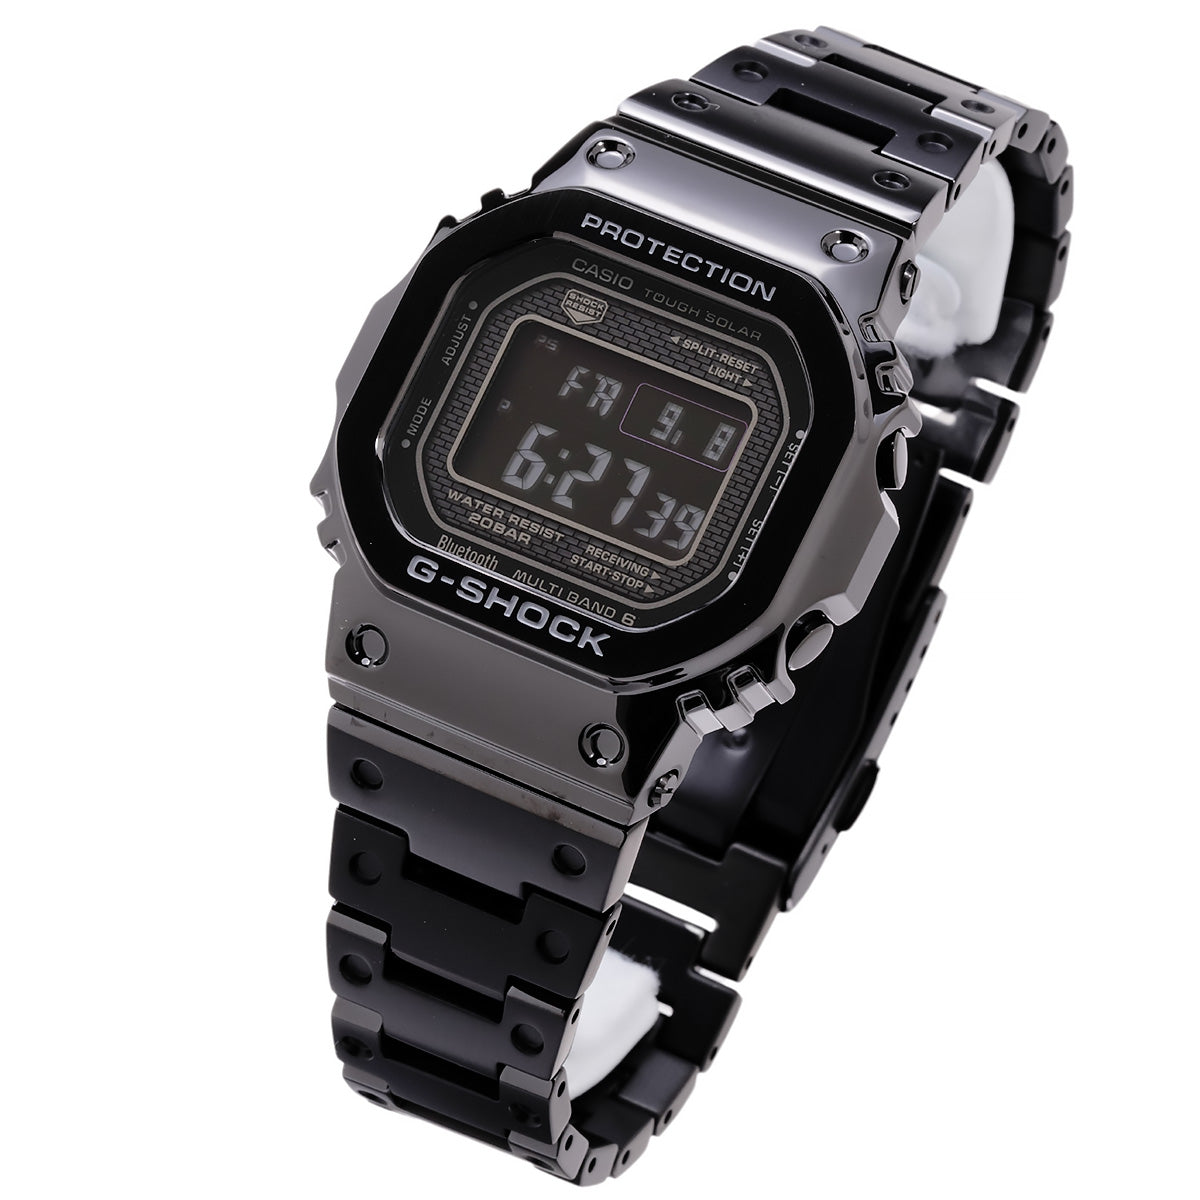 CASIO FULL METAL 5000 SERIES GMW-B5000GD-1JF – With Time JP